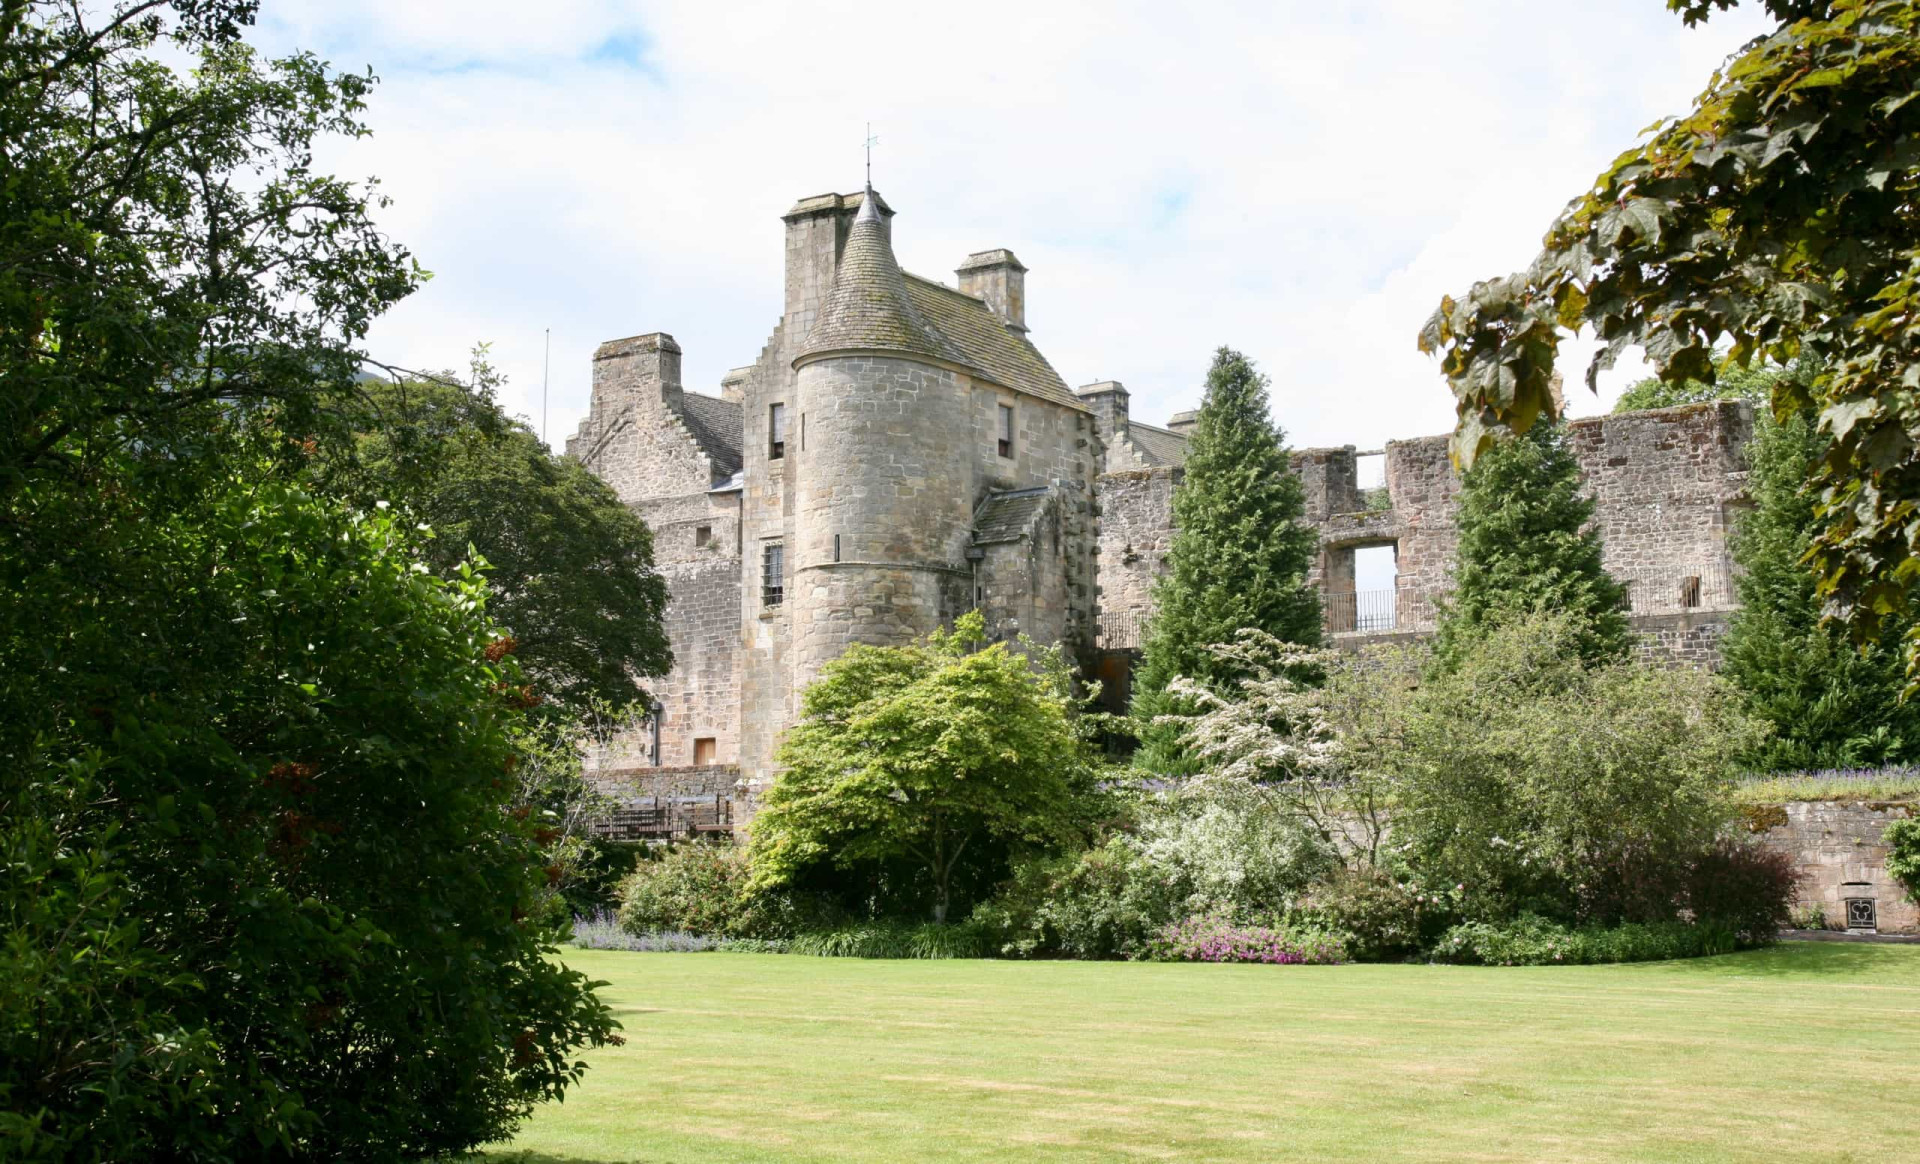 <p>Once a royal country residence loved by Mary Queen of Scots, this grand Renaissance castle is haunted by a tale of doomed romance.</p><p>You may also like:<a href="https://www.starsinsider.com/n/342720?utm_source=msn.com&utm_medium=display&utm_campaign=referral_description&utm_content=479726v1en-ca"> Celebrities who tragically lost their children</a></p>